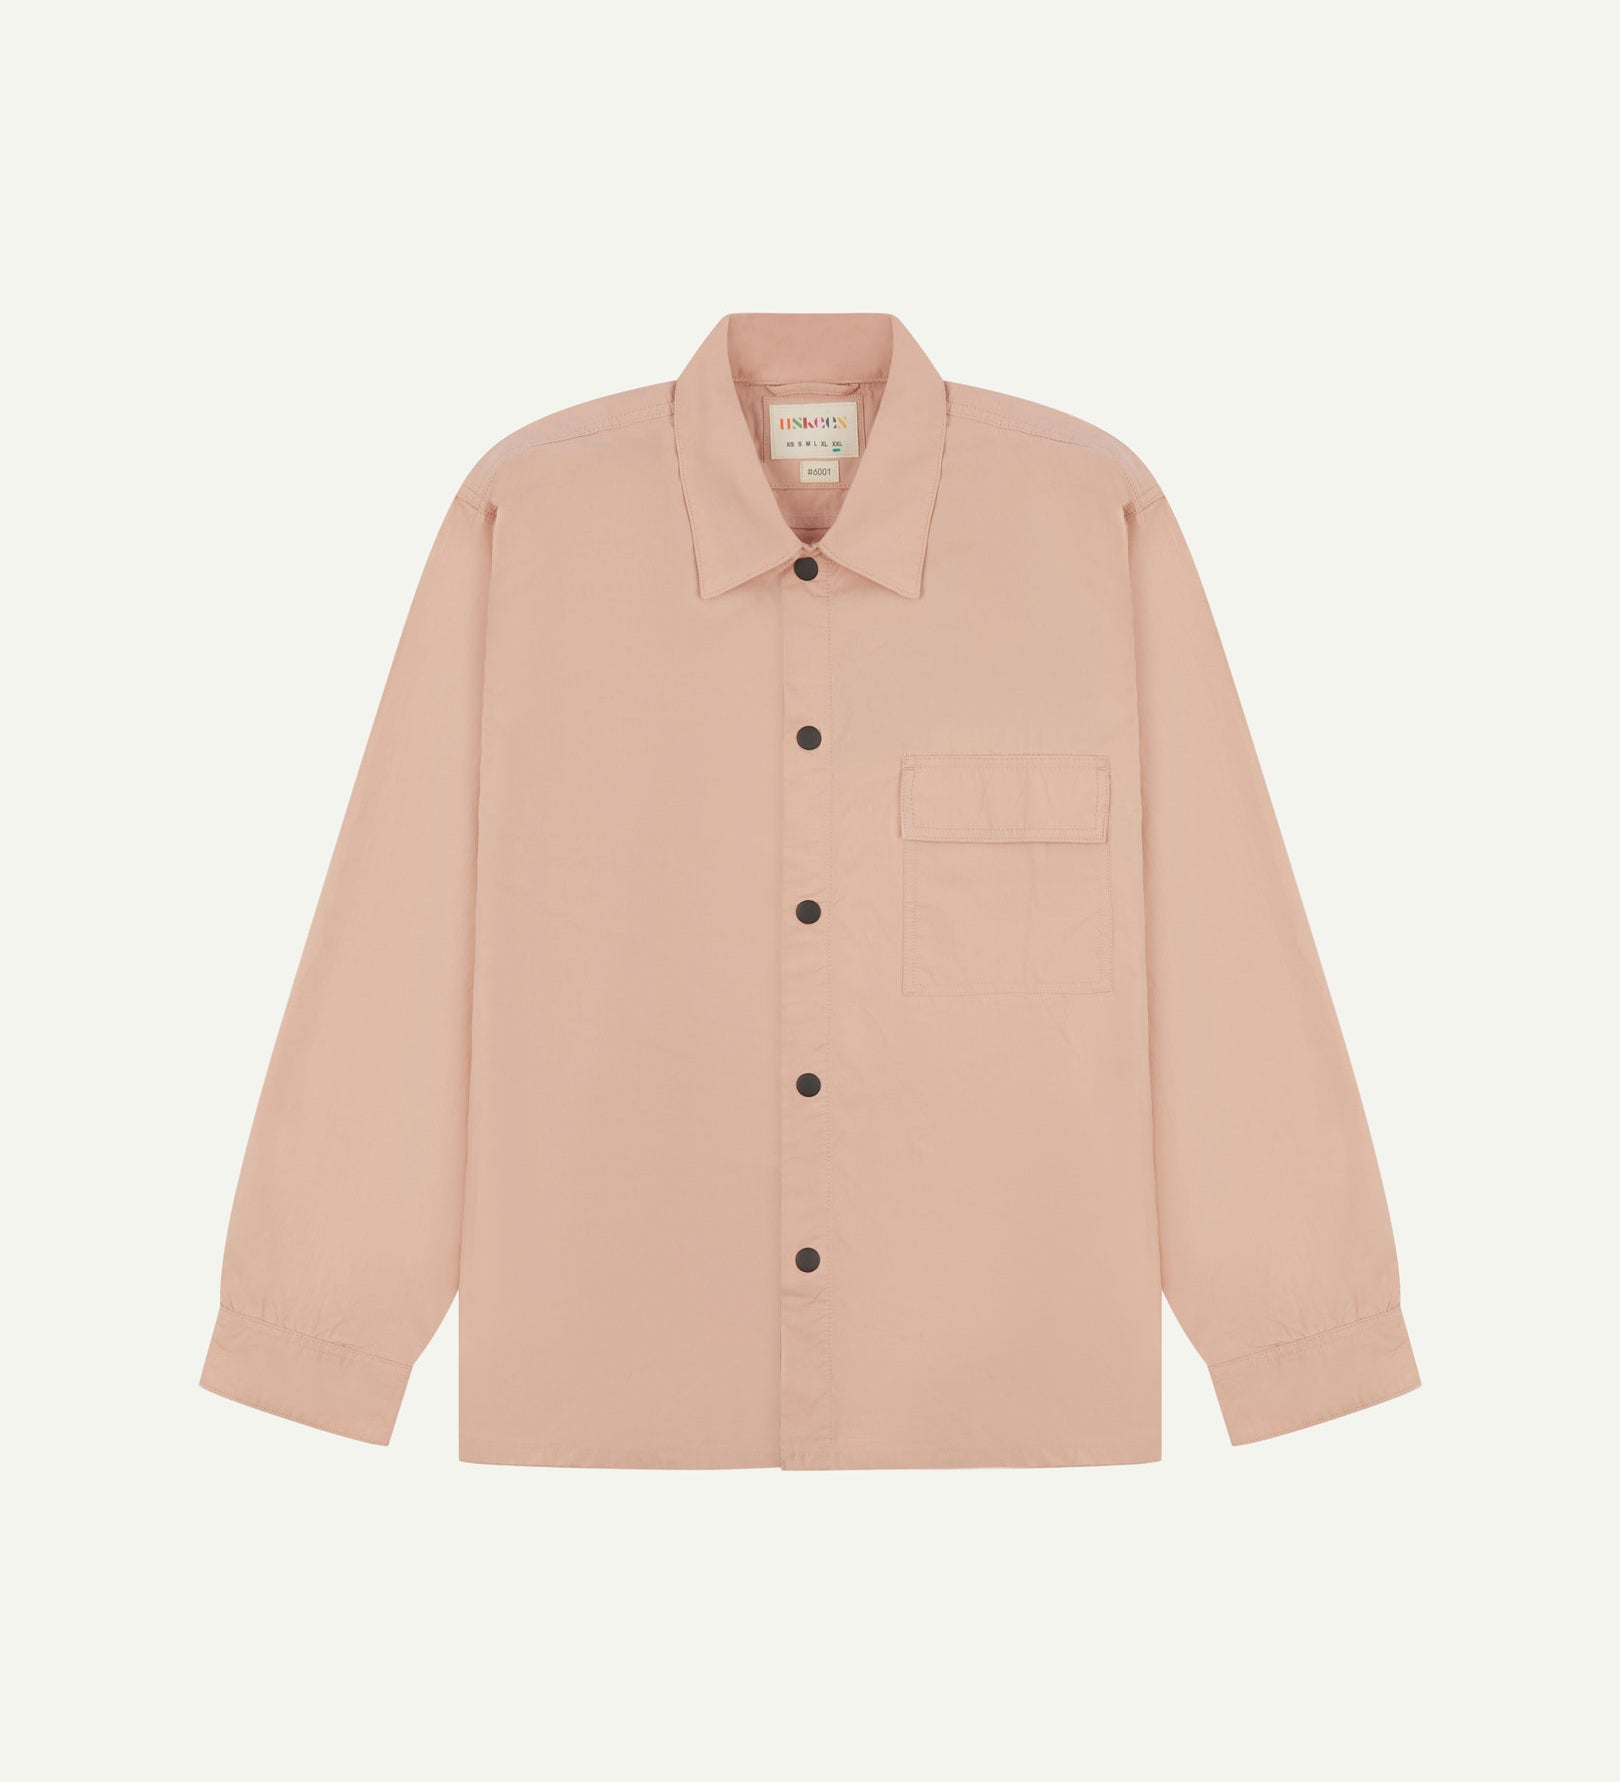 Front flat view of dusty pink, lightweight overshirt. Clear view of the press studs, breast pocket and Uskees branding label.